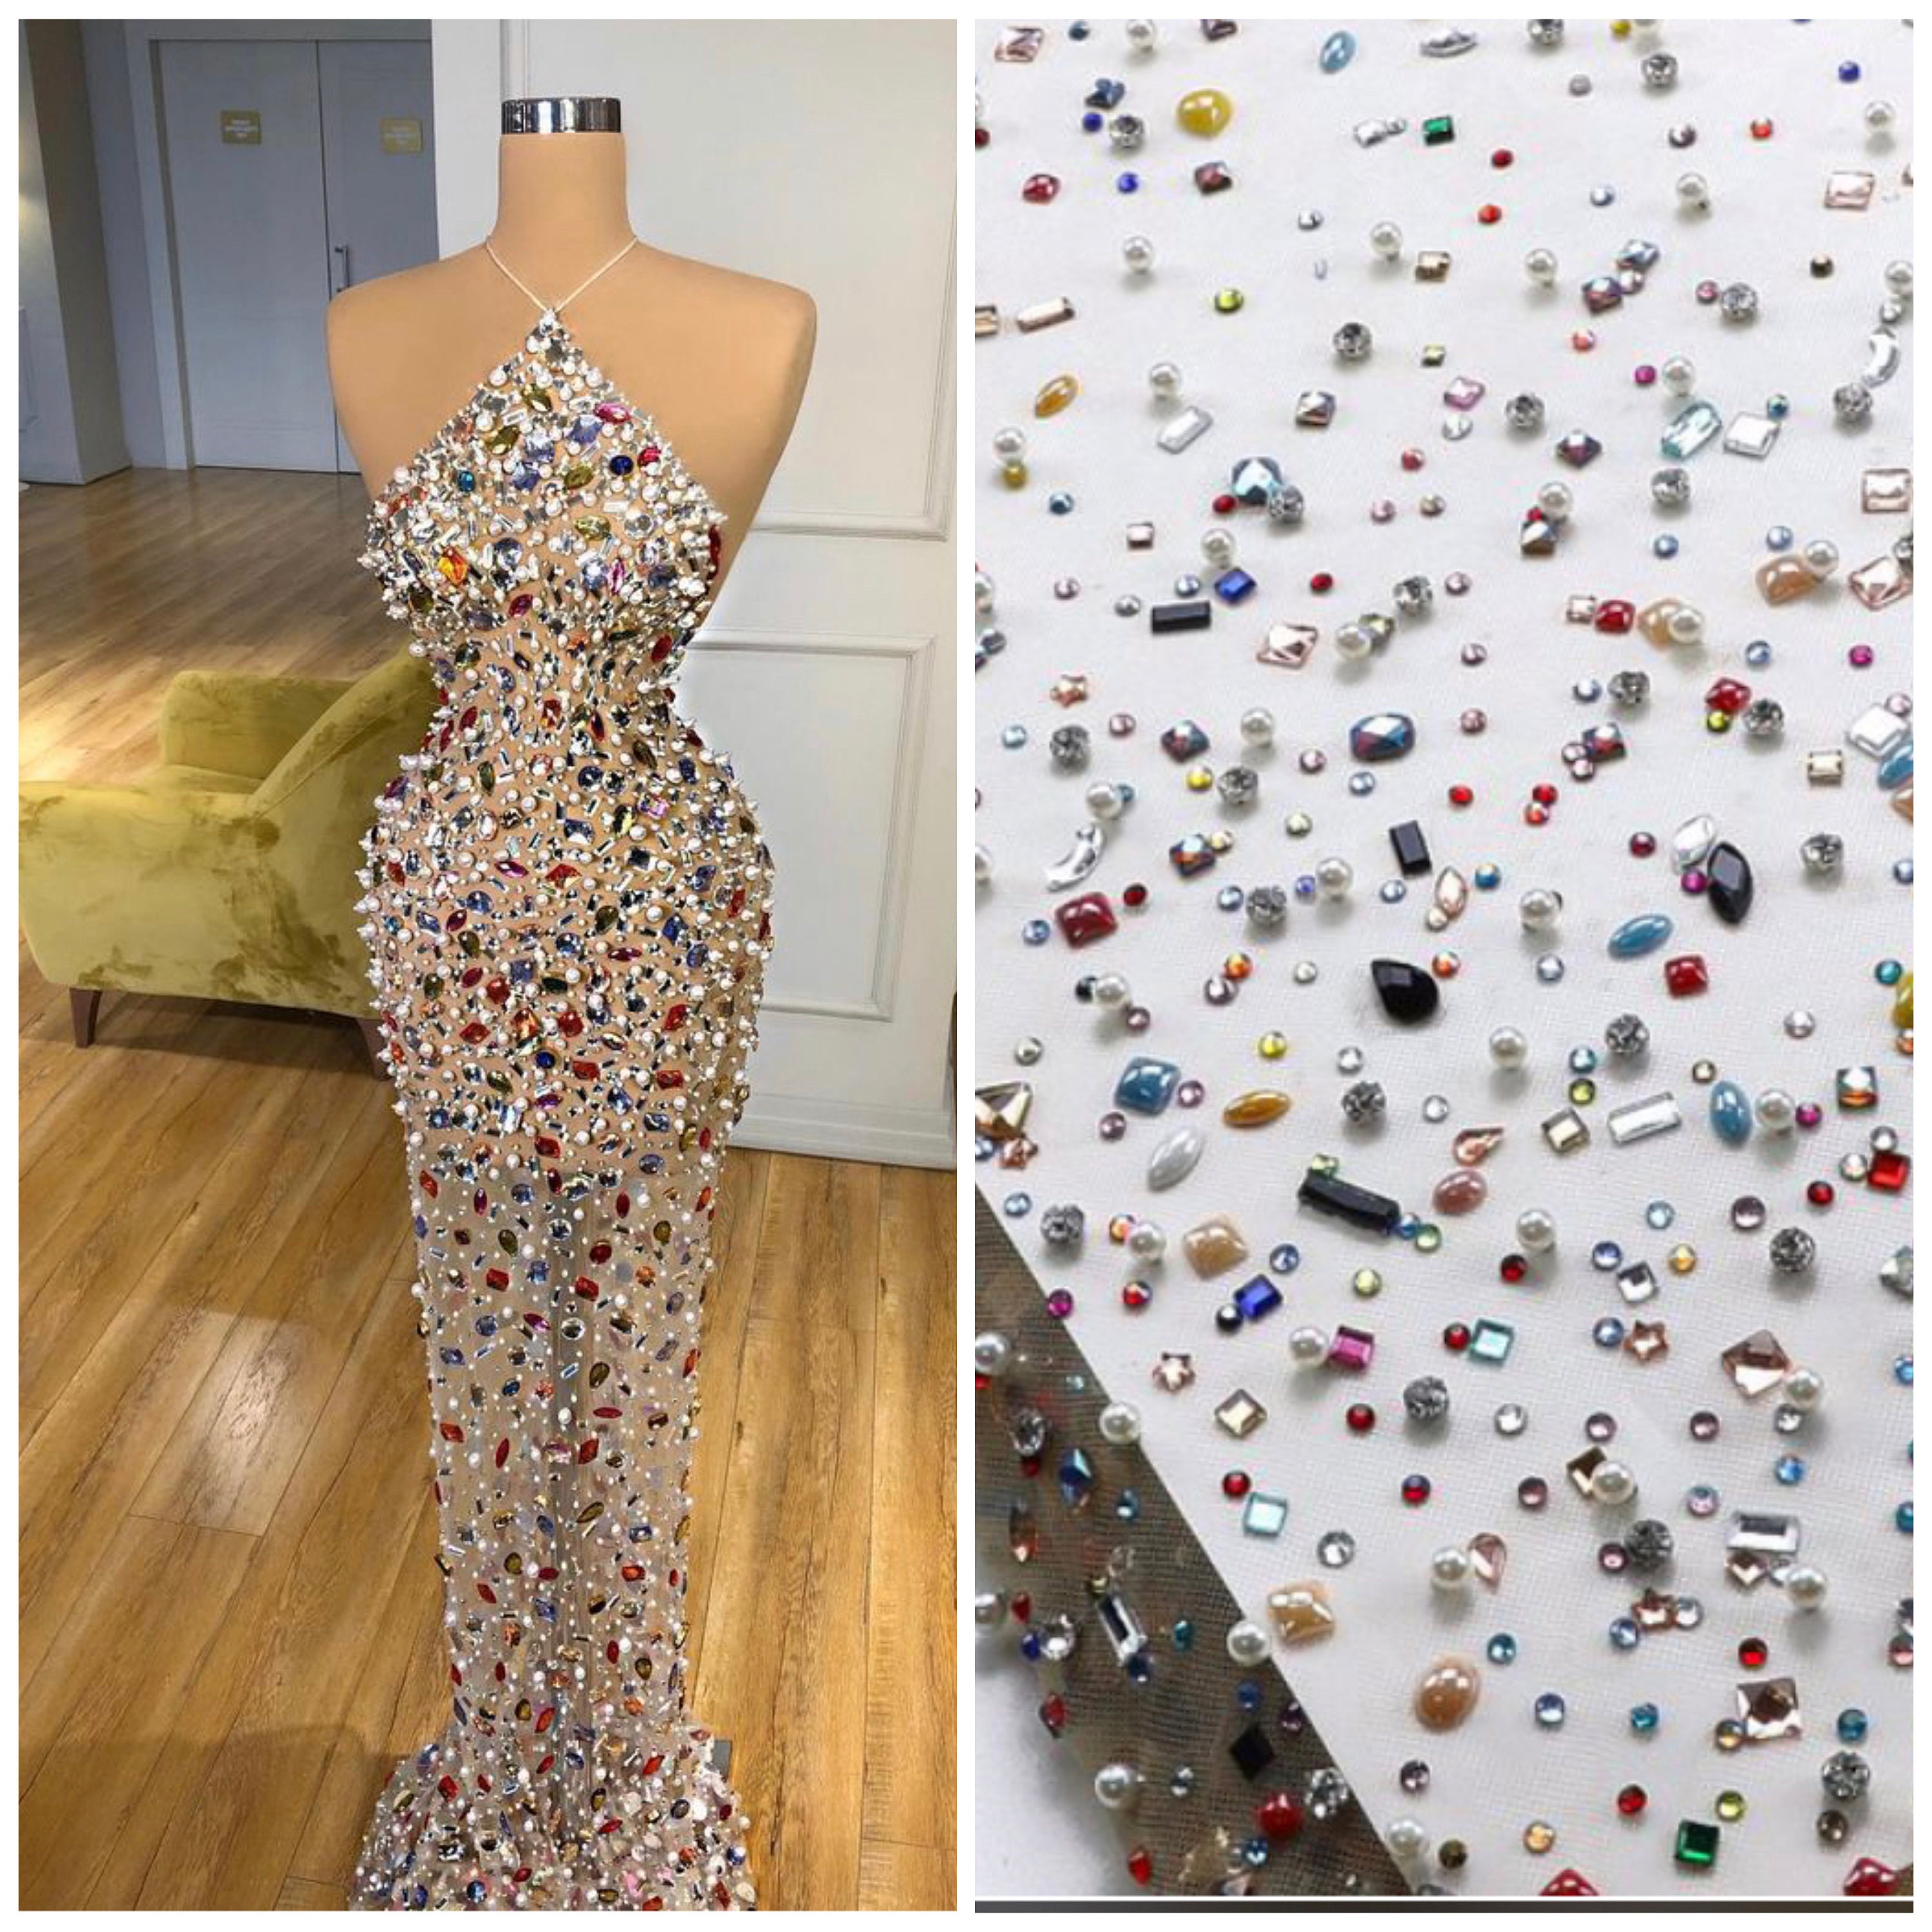 Fashion Glitter Sequins Evening Dresses Net Rhinestone Fabric Glued Sequins  Printed Mesh Fabric French Shining Wedding Dress Cloth From Waxeer, $44.8